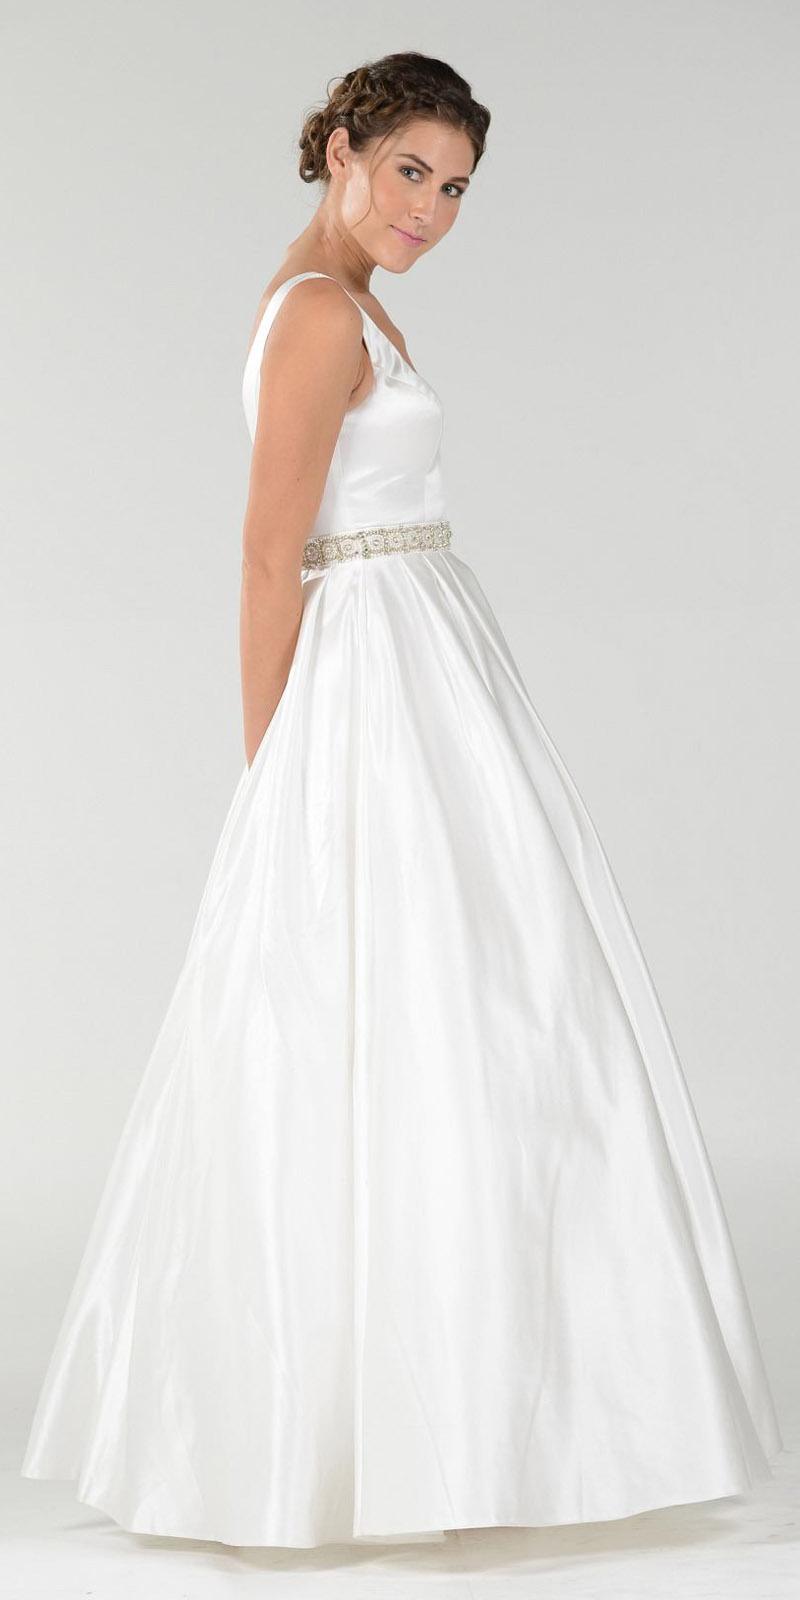 Poly USA 7932 Embellished Waist Plunging V-Neck Off White Satin Ball Gown A-Line